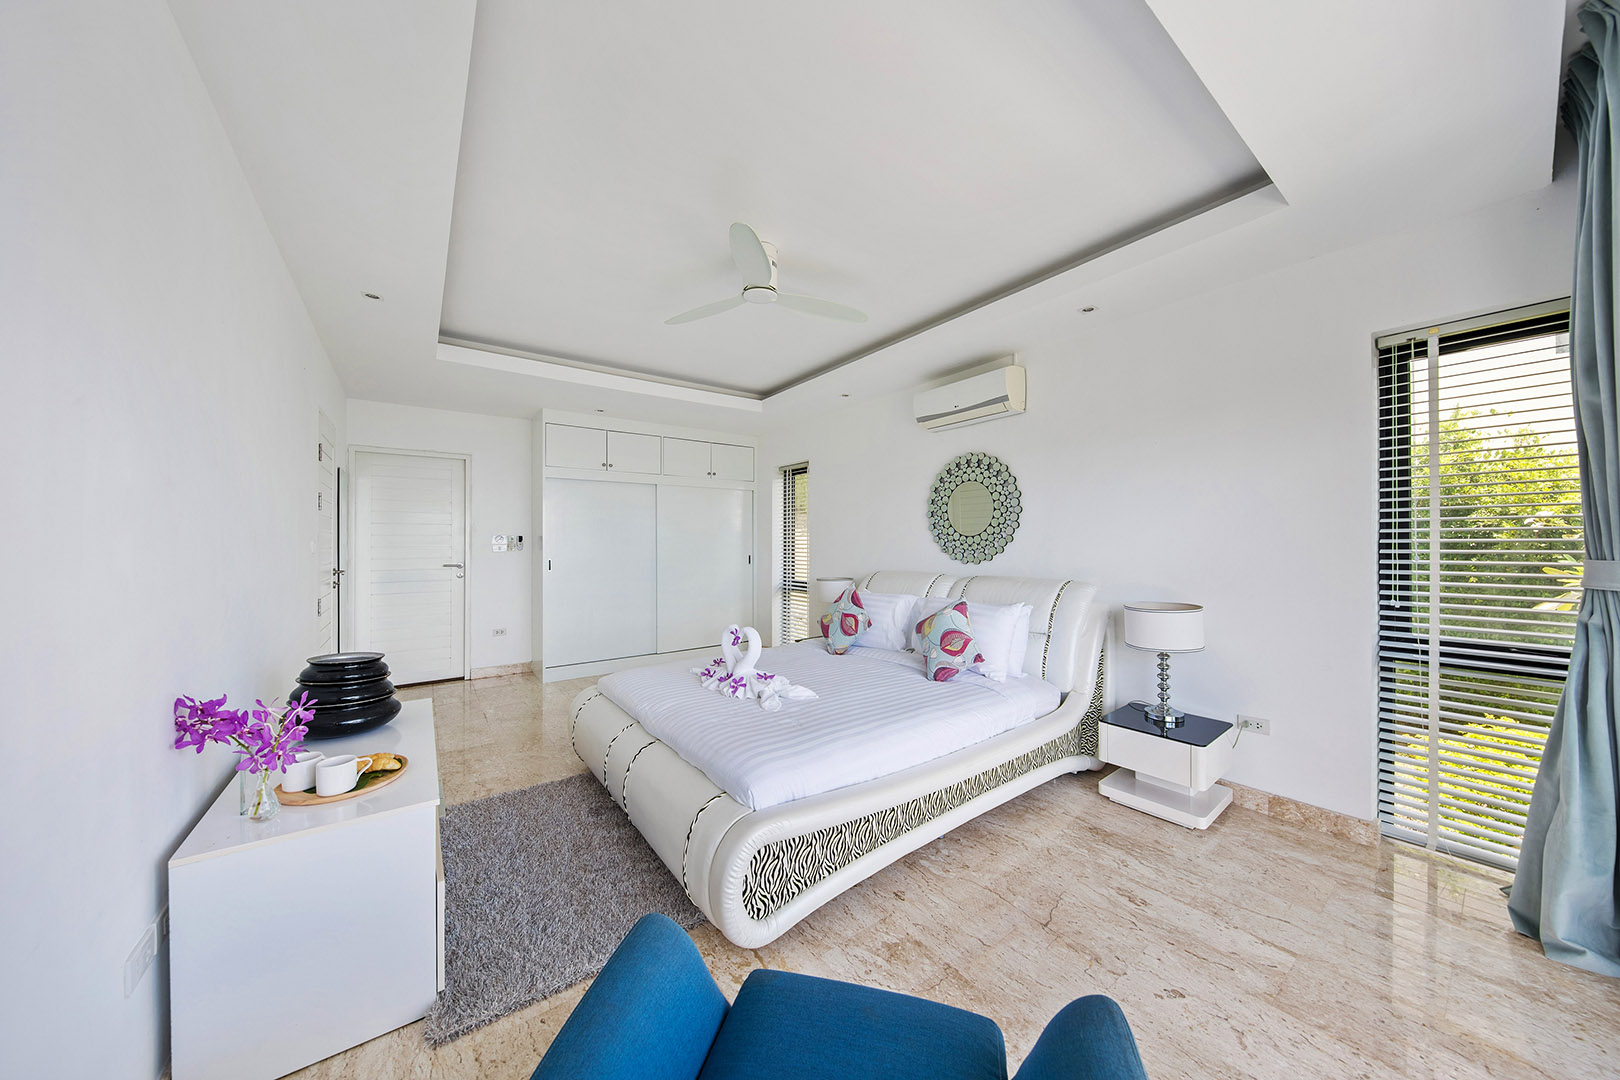 Contemporary 3 Bedroom Seaview Semi-Detached Pool Villa in Chaweng Noi for sale: Contemporary 3 Bedroom Seaview Semi-Detached Pool Villa in Chaweng Noi for sale